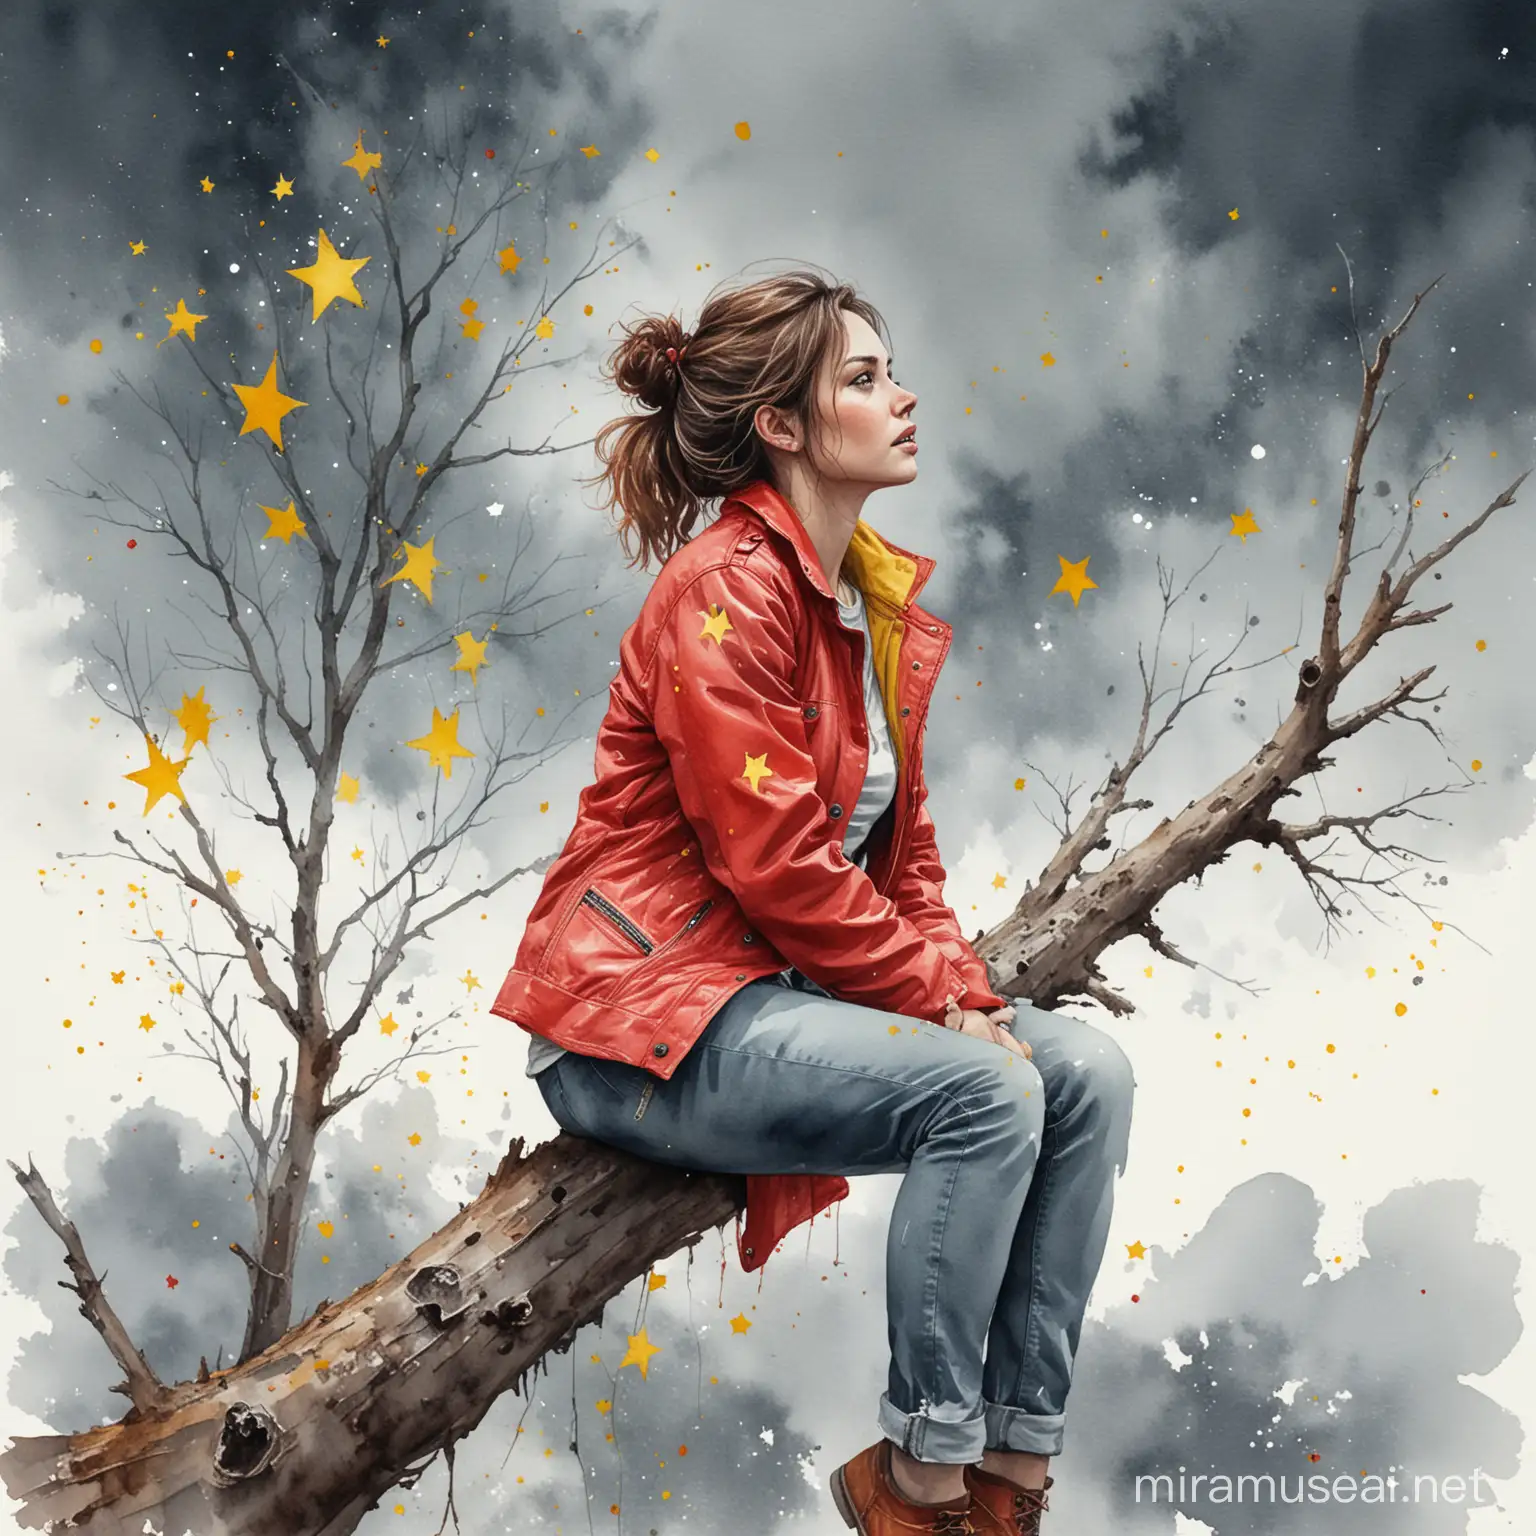 messy watercolor illustration depicting a women with red jacket sitting on a tree branch, background sky with 5 yellow stars under a hammer ,  watercolor, no distortion, gray palette, insanely high detail, very high quality, seen from the side